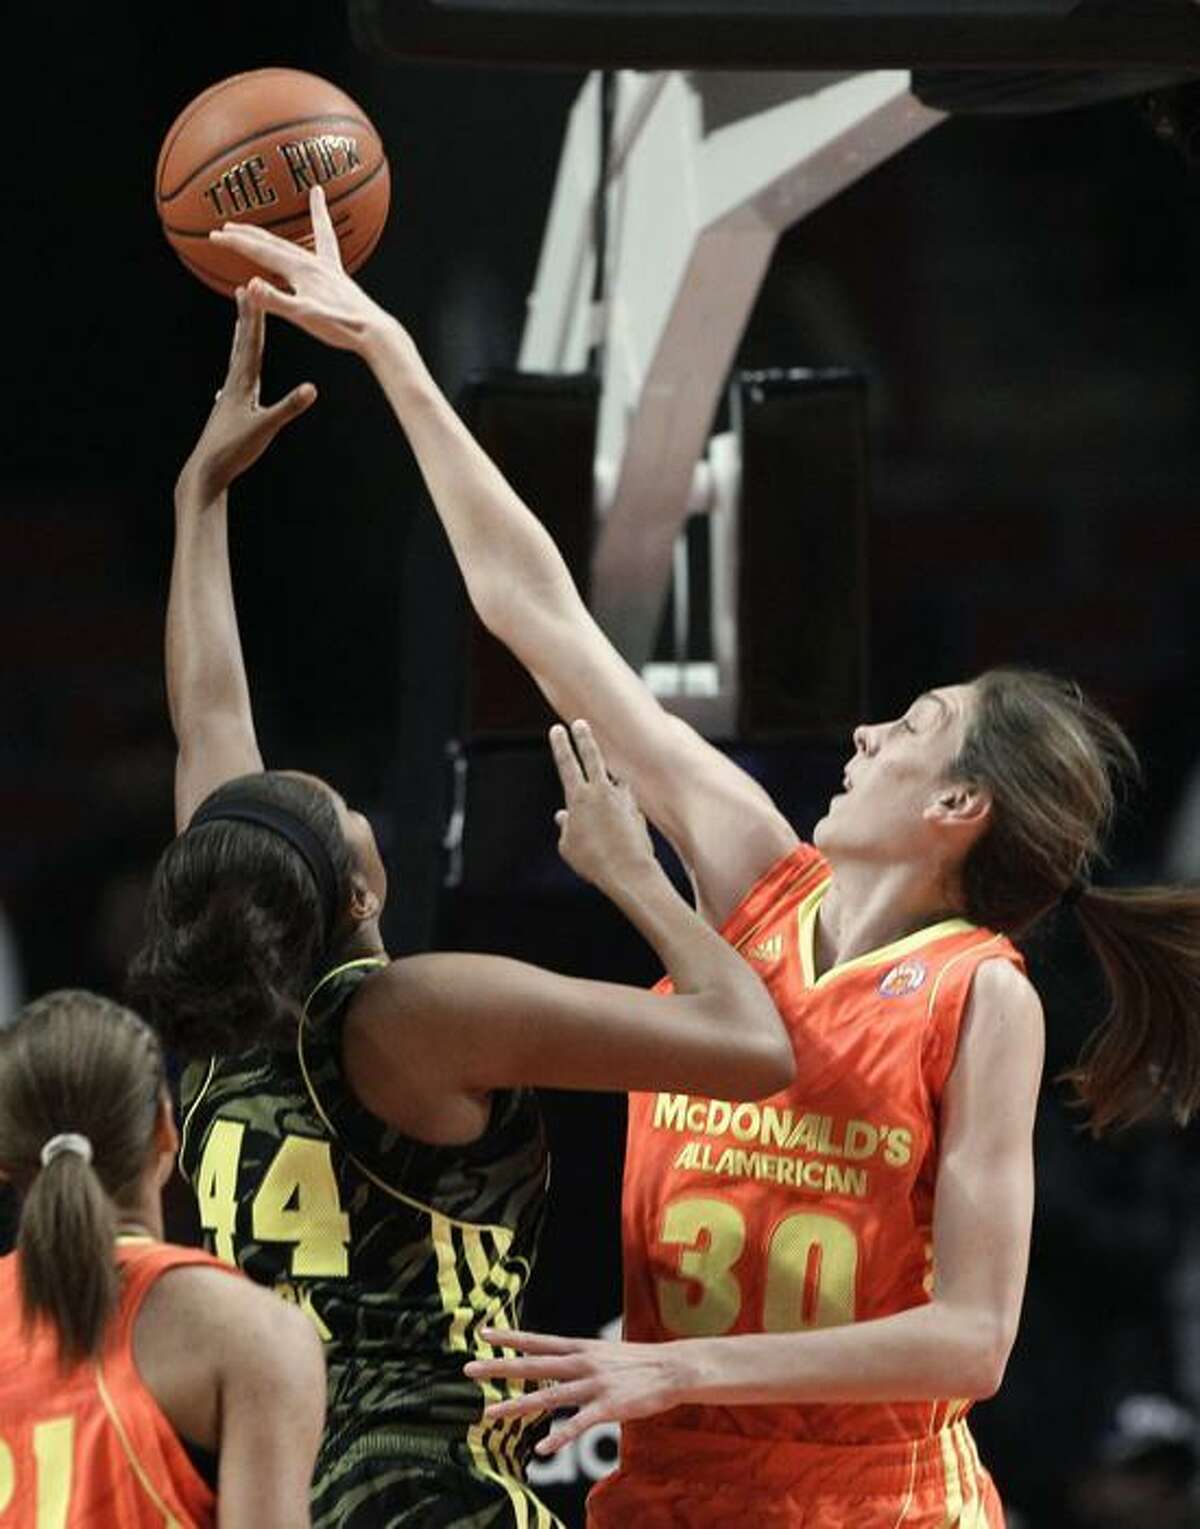 East's Breanna Stewart,(30) from North Syracuse, N.Y., blocks the shot of West's Morgan Tuck (44) from Bolingbrook, Ill., during the first half of the McDonald's All-American girls' basketball game in Chicago, Wednesday, March 28, 2012. (AP Photo/Nam Y. Huh)